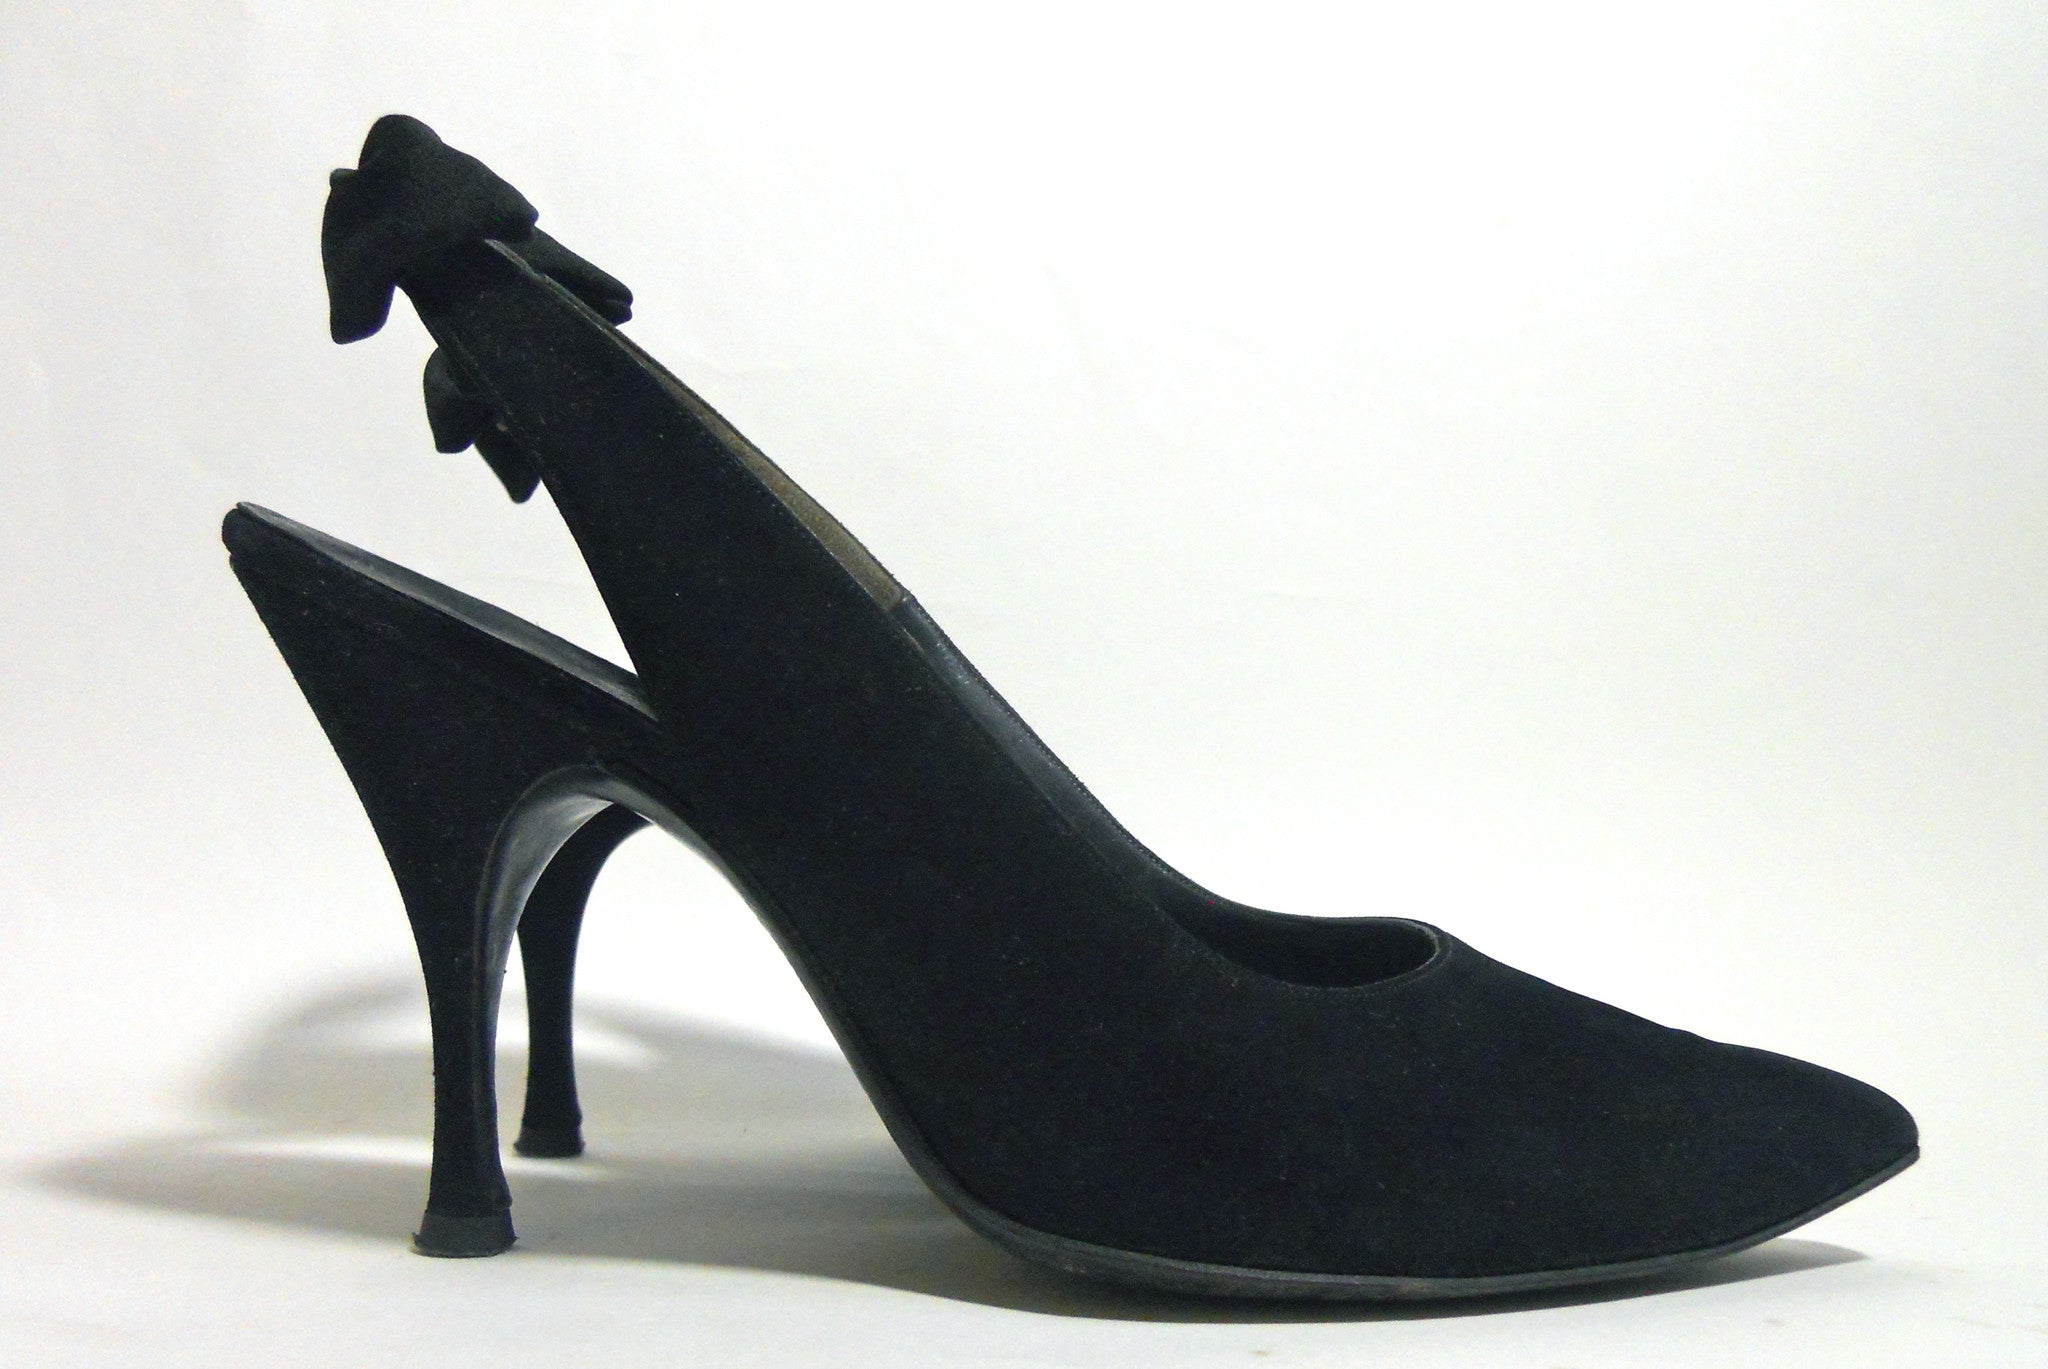 Black Suede Stiletto Heel Slingback Shoes with Bows circa 1960s